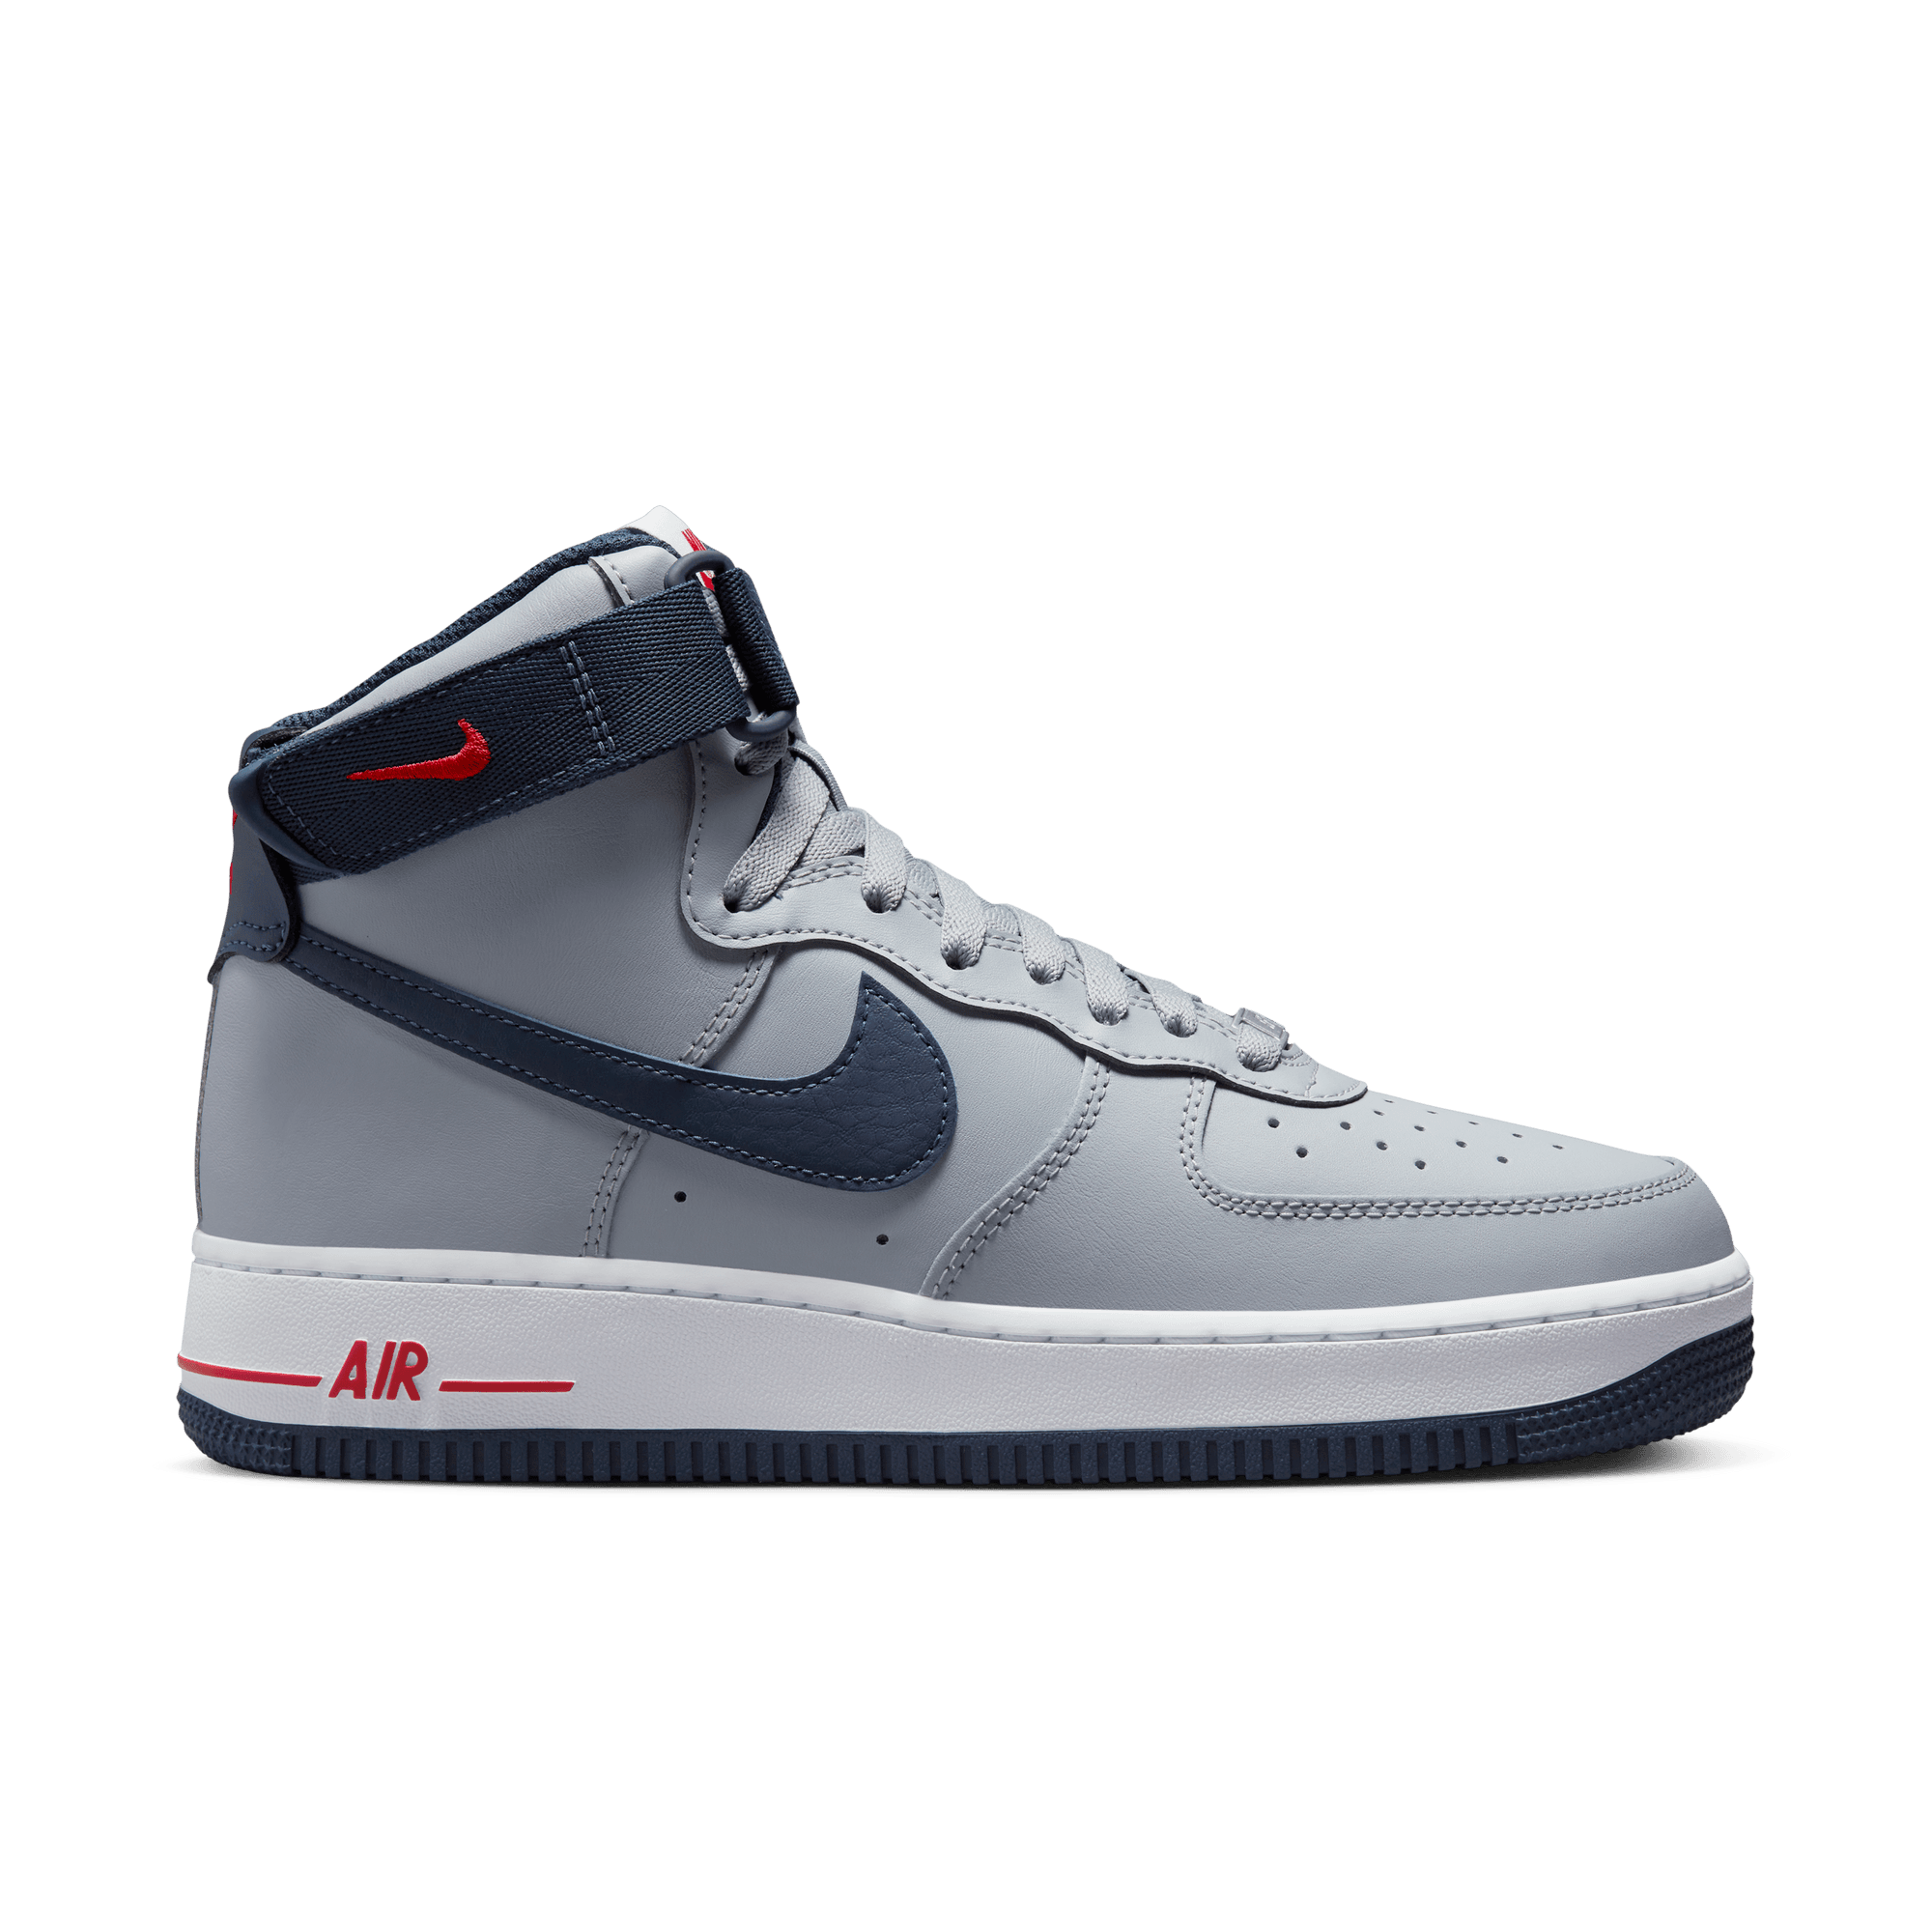 Nike Air Force 1 High '07 - SoleFly